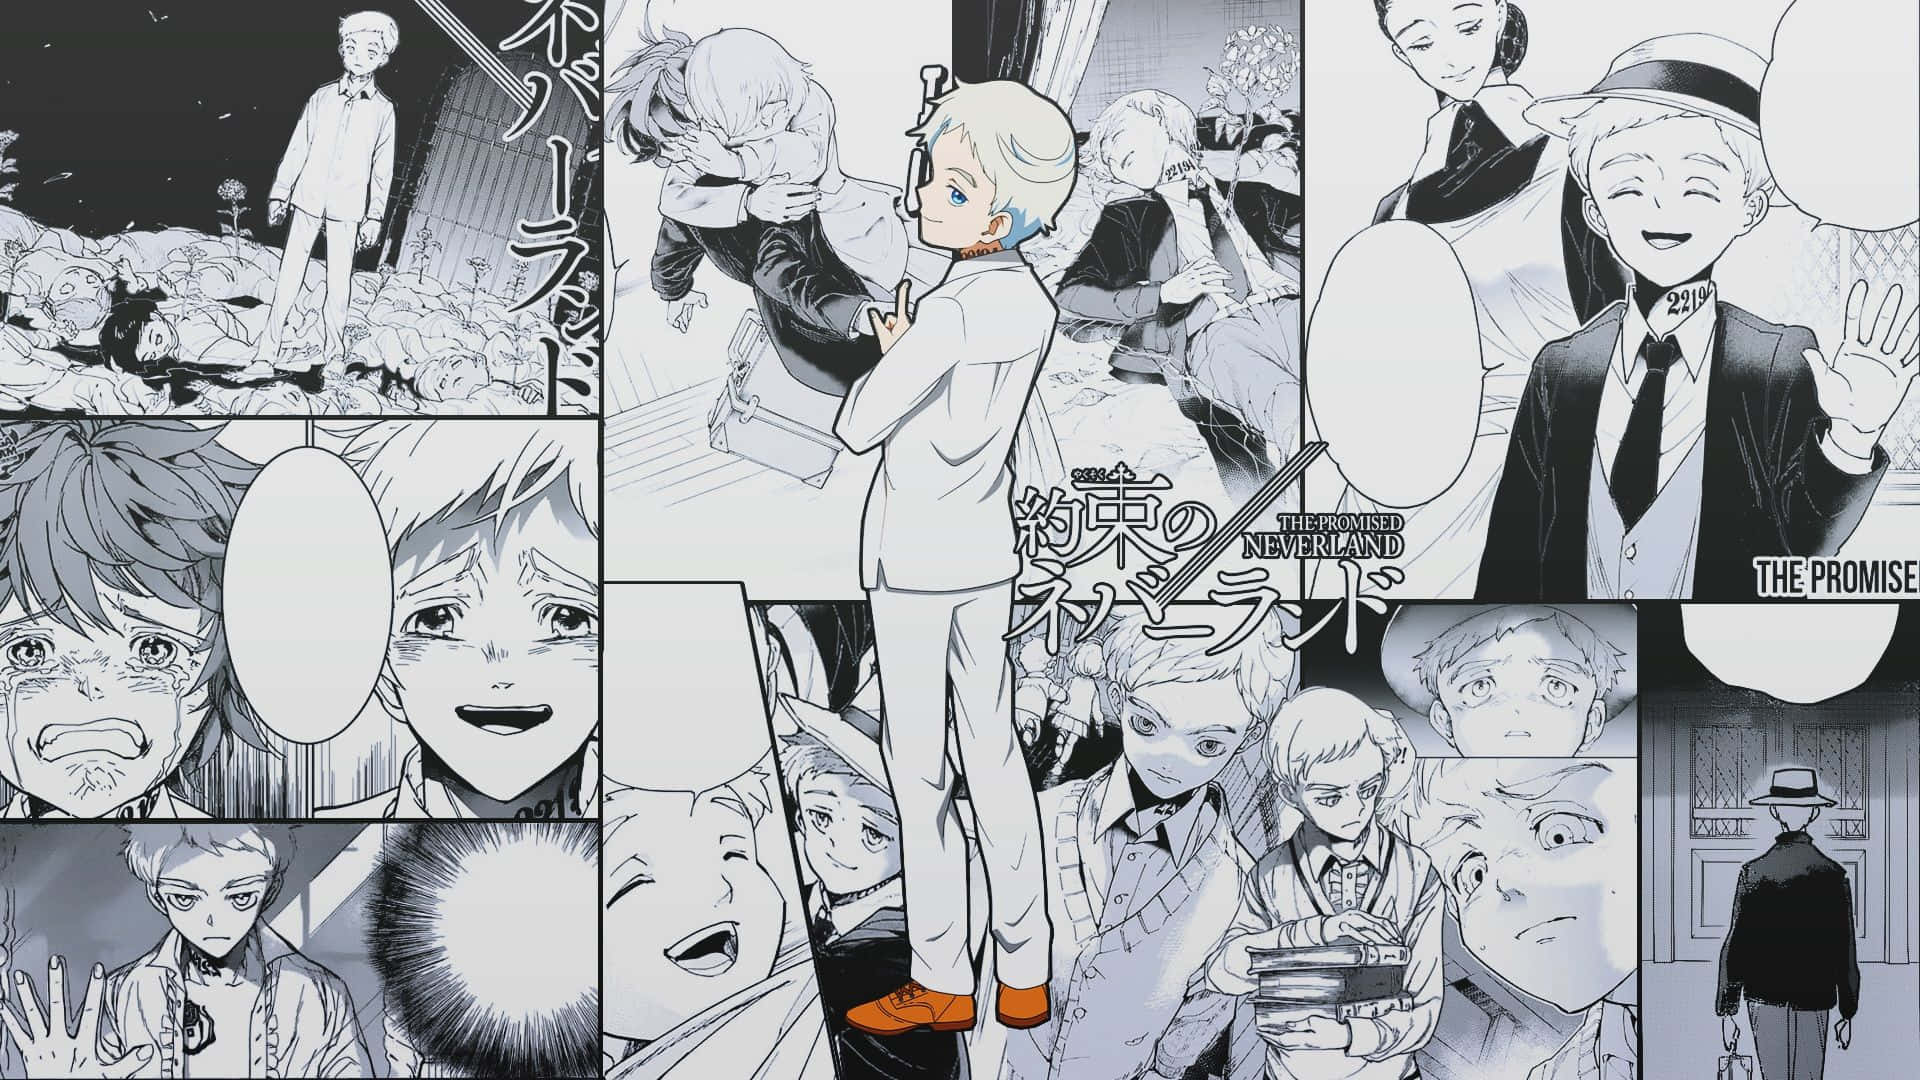 Norman from The Promised Neverland standing strong Wallpaper